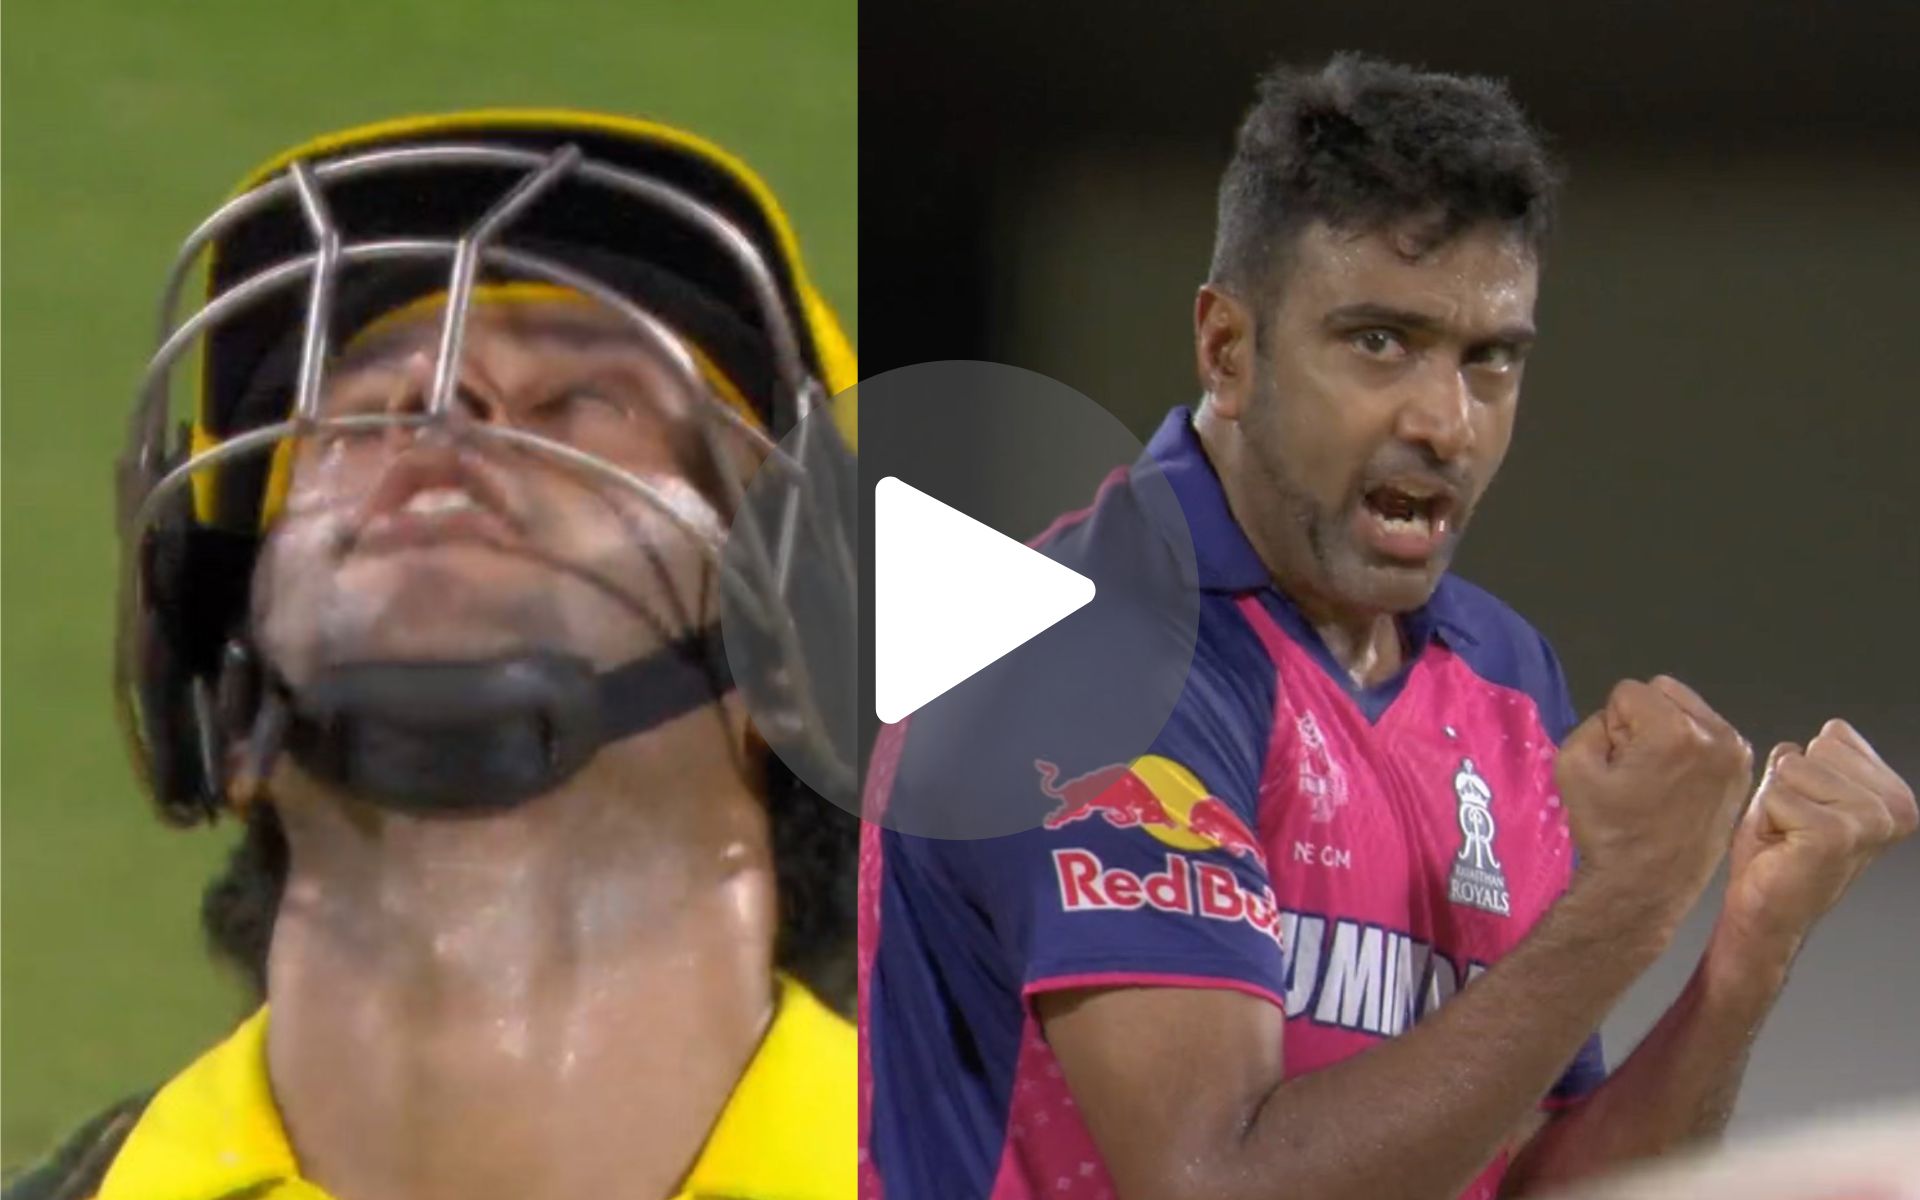 [Watch] 6,4,4,W - Ashwin's Cold Revenge On Dube After Getting Hammered Mercilessly